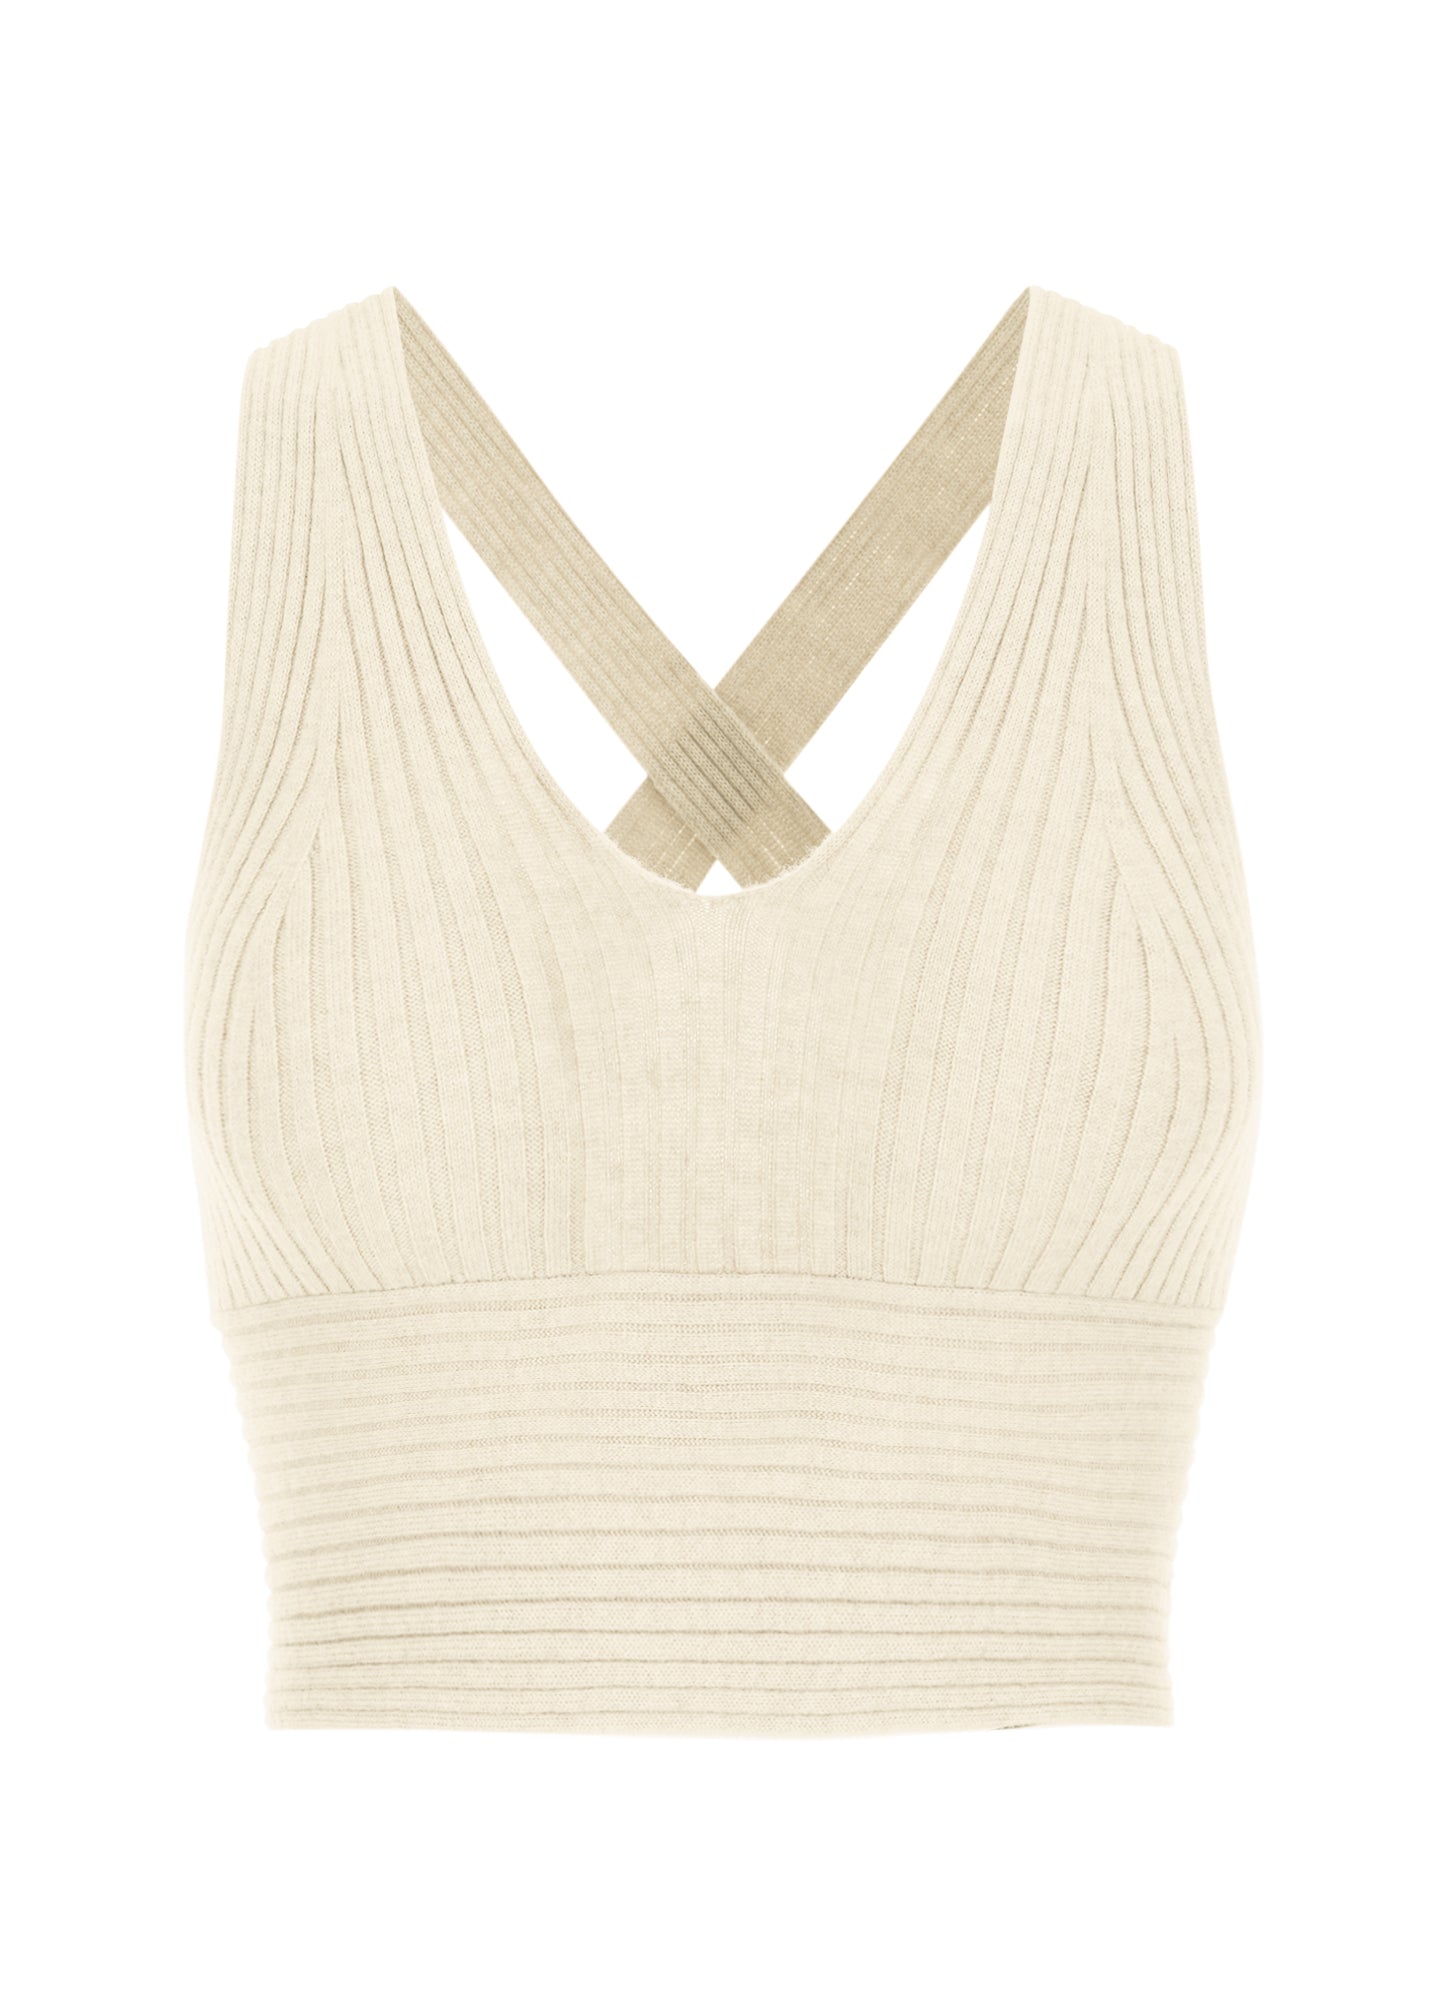 Cashmere knit cropped top bralette crossed back in cream